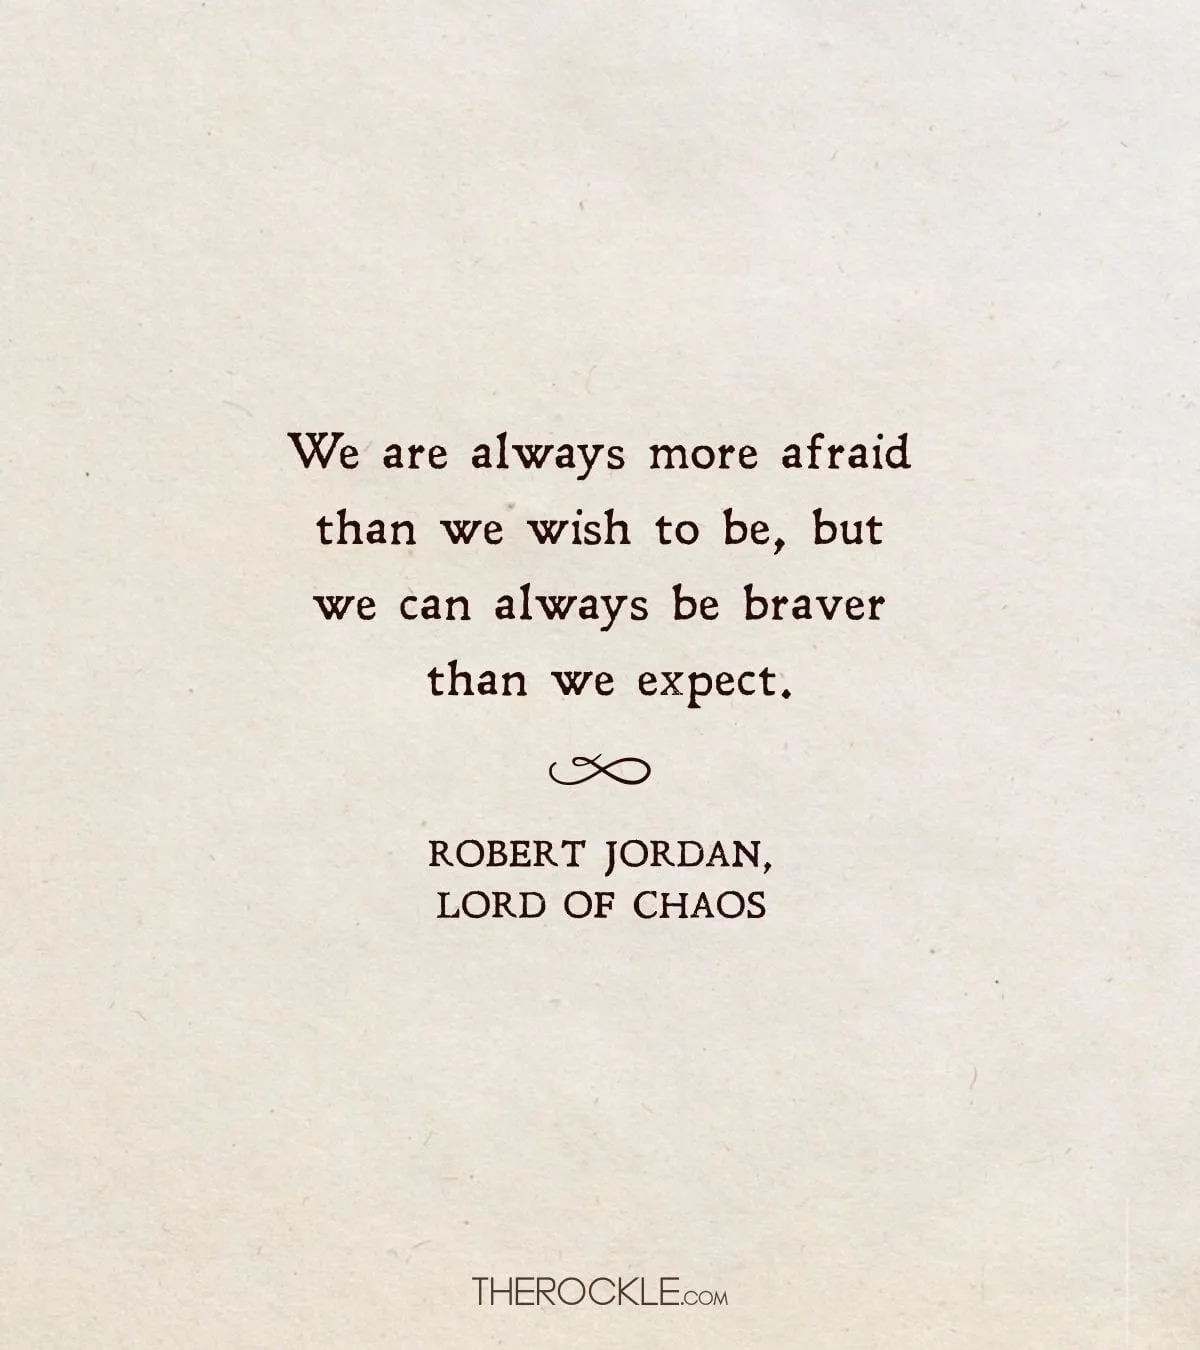 Robert Jordan's quote about facing your fears